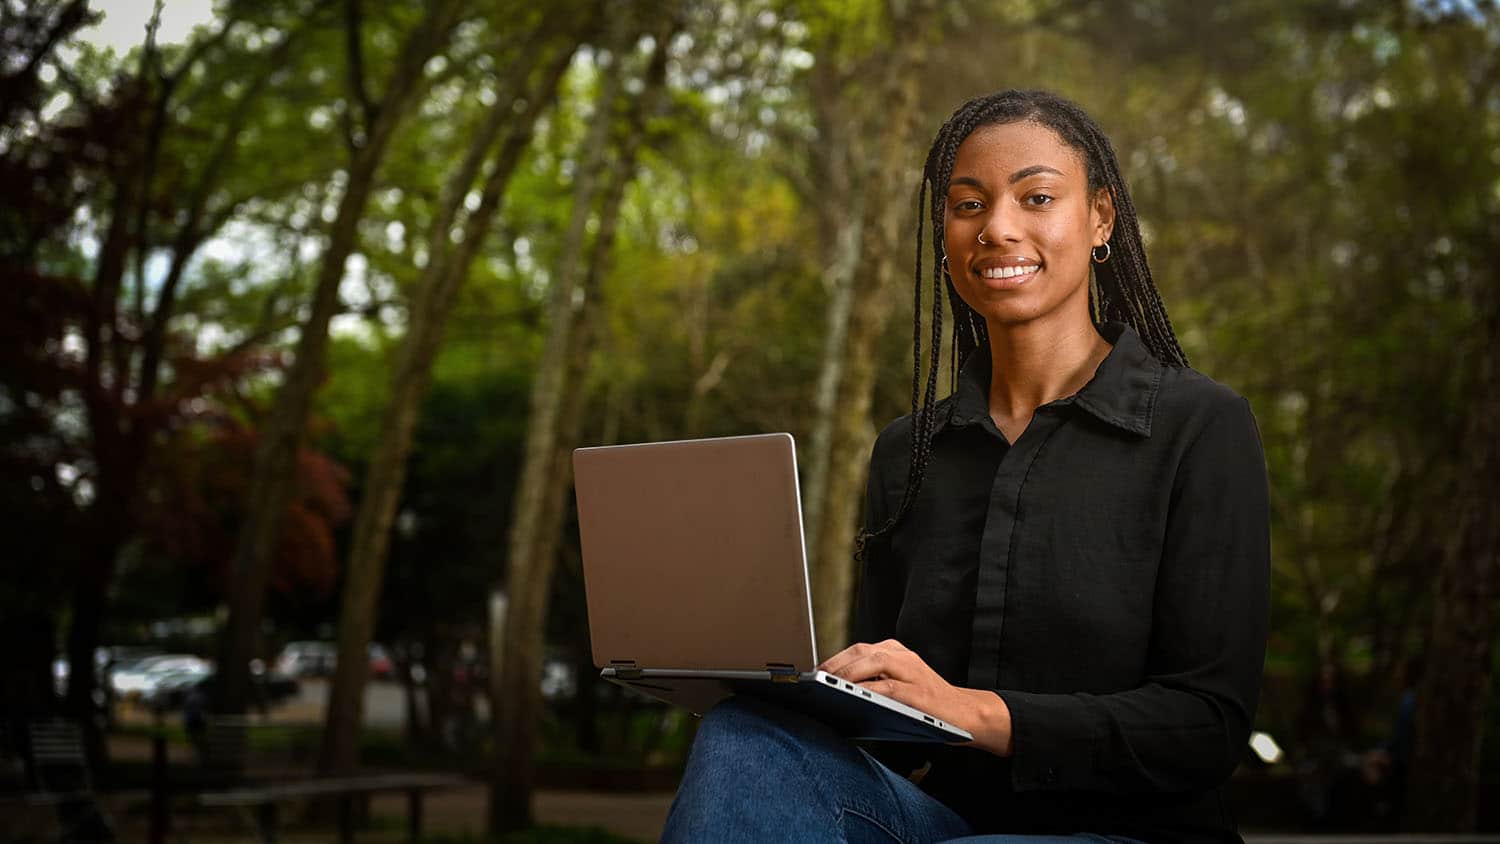 NC State senior Jaz Bryant conducted an undergraduate research project that explored voter perceptions of the outcomes of major national elections.